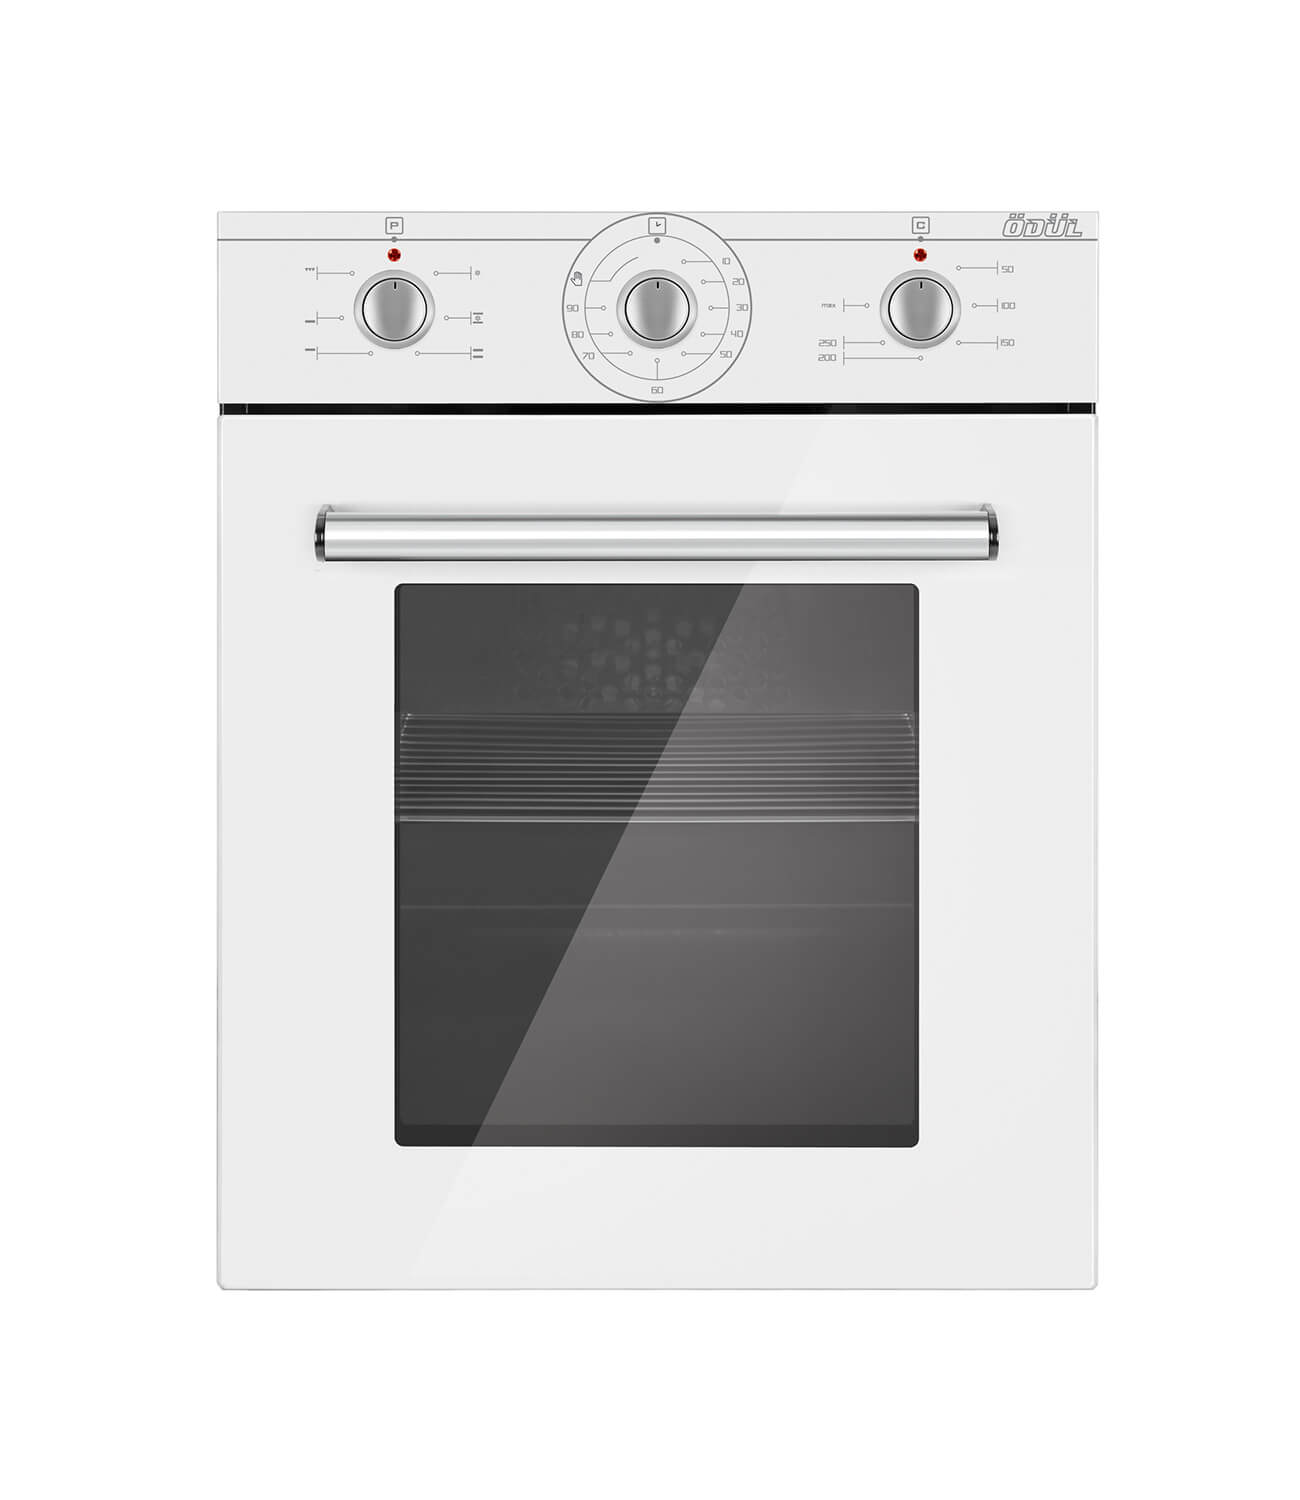 BO-45 electrical oven